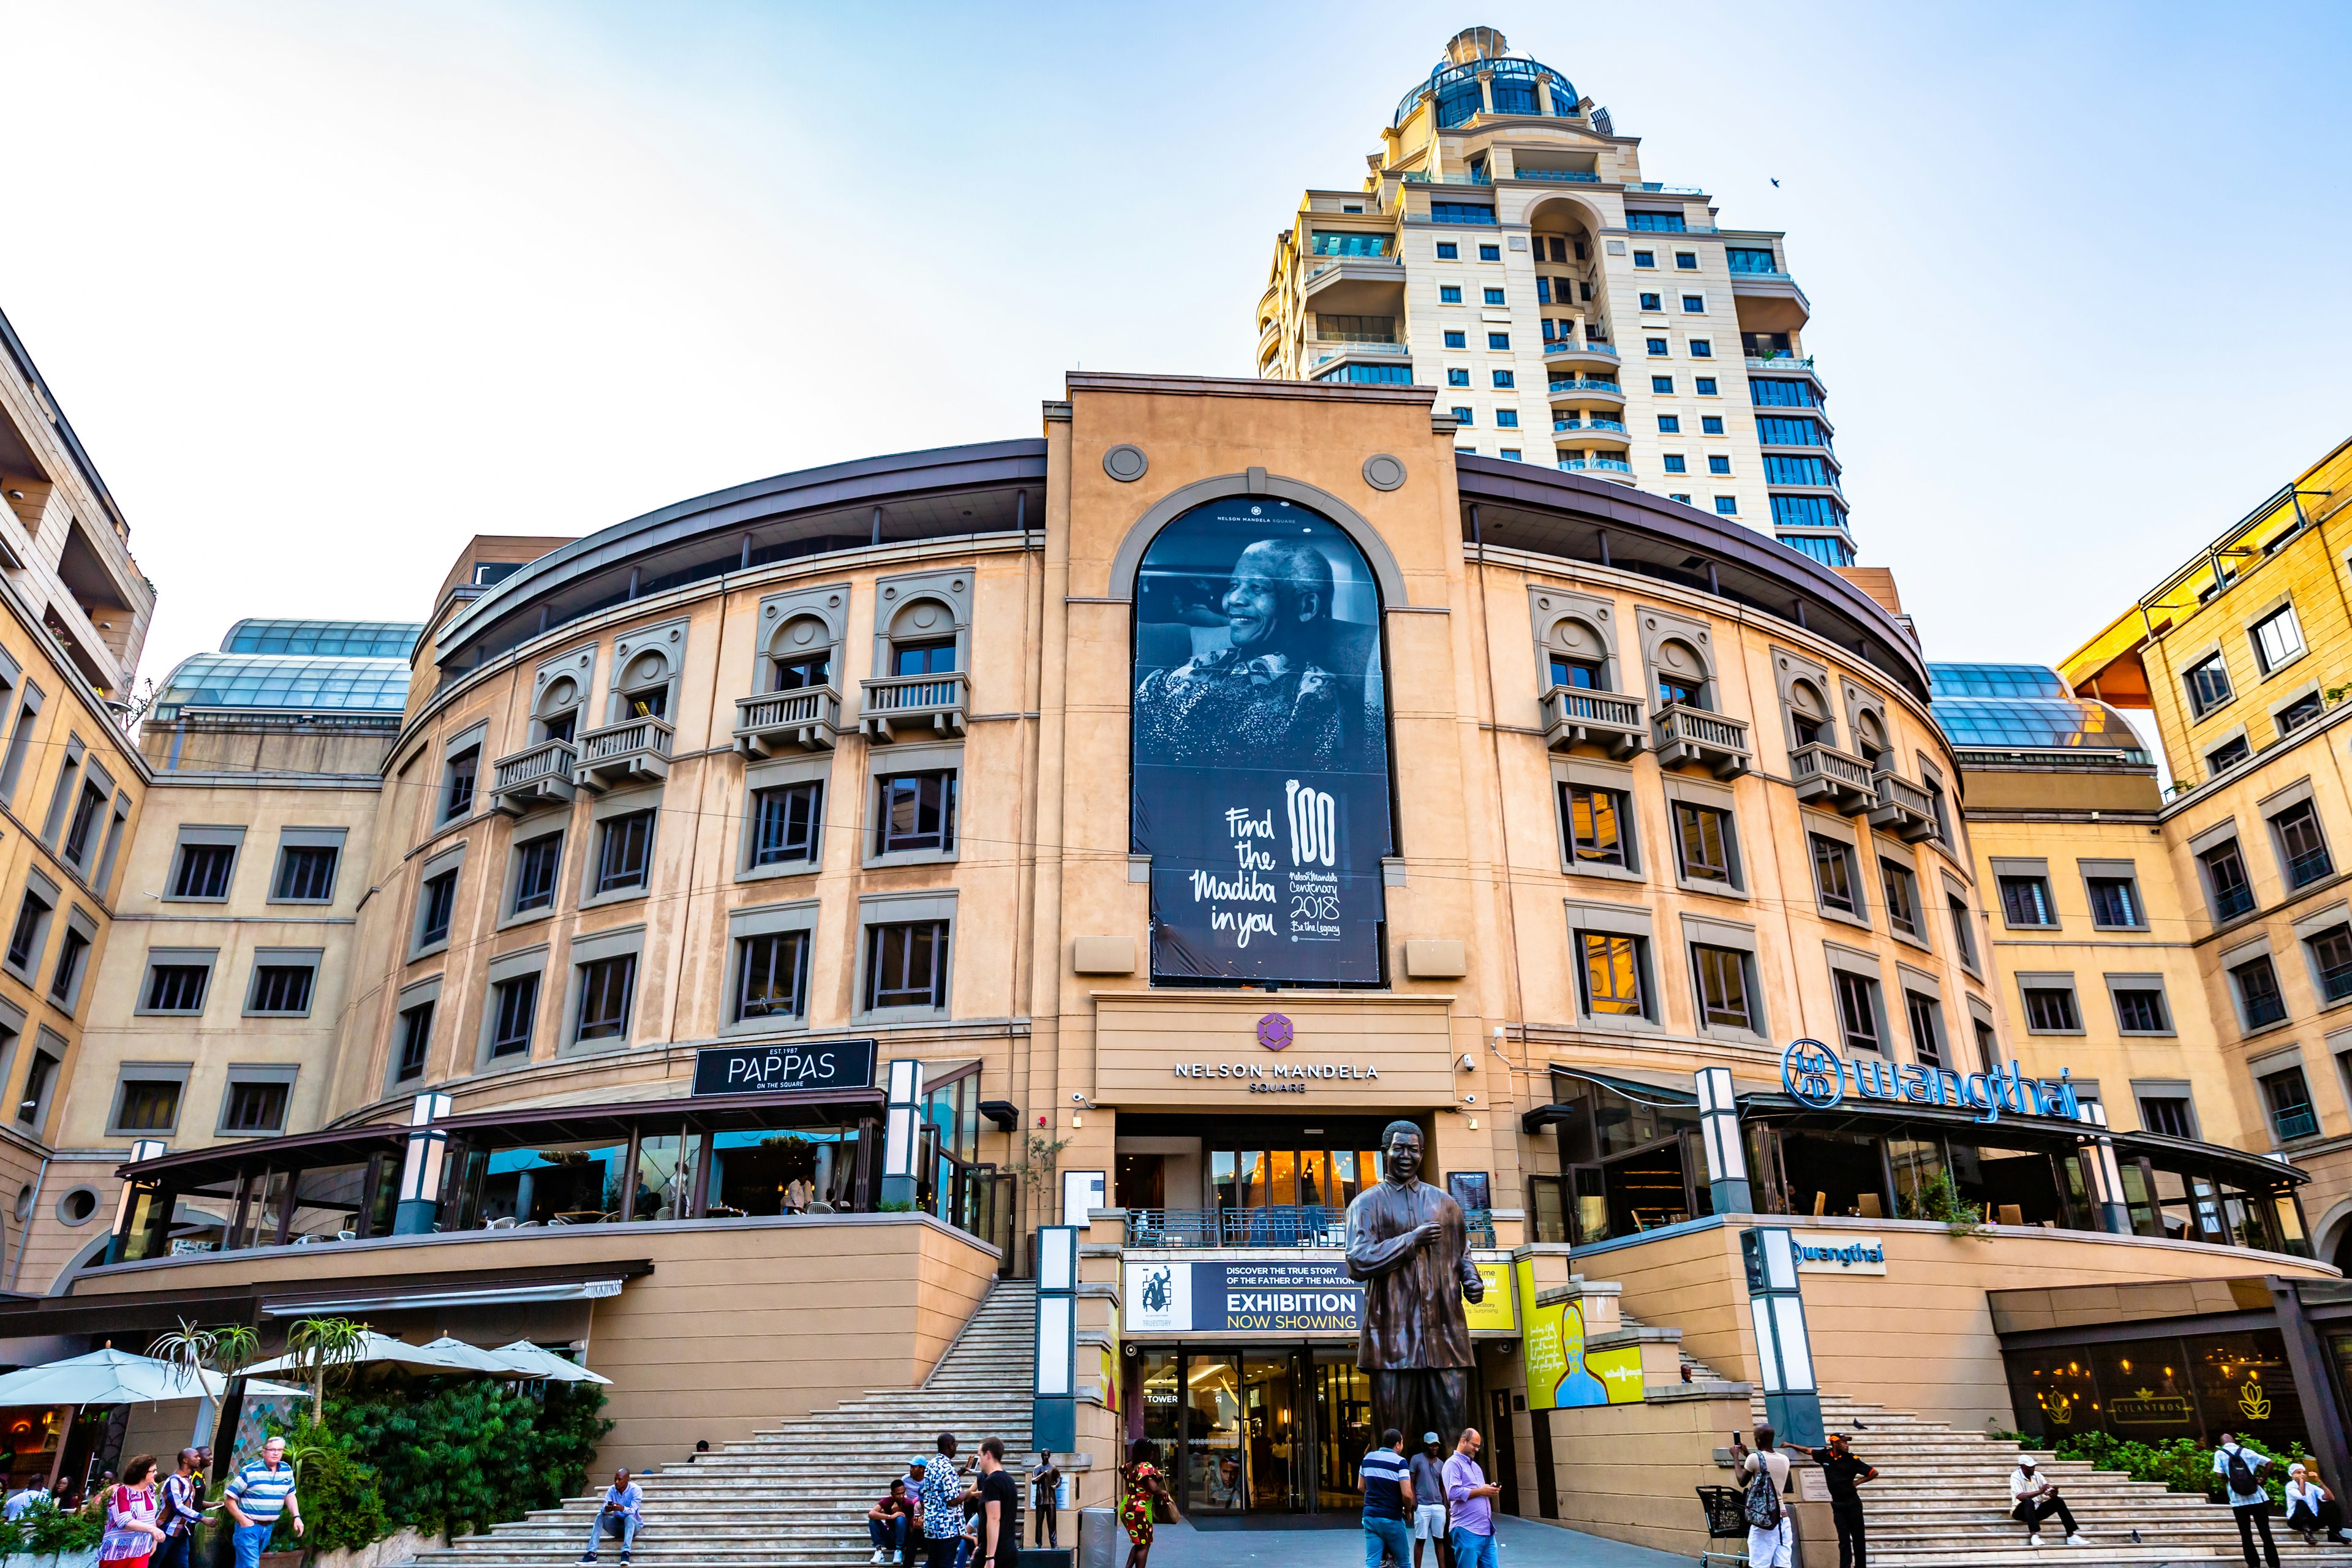 This image shows the famous Nelson Mandela Square is a public space and shopping area. It has big statue of Nelson Mandela and water fountain. The pic is taken in march 2019 in Johannesburg, South Africa.